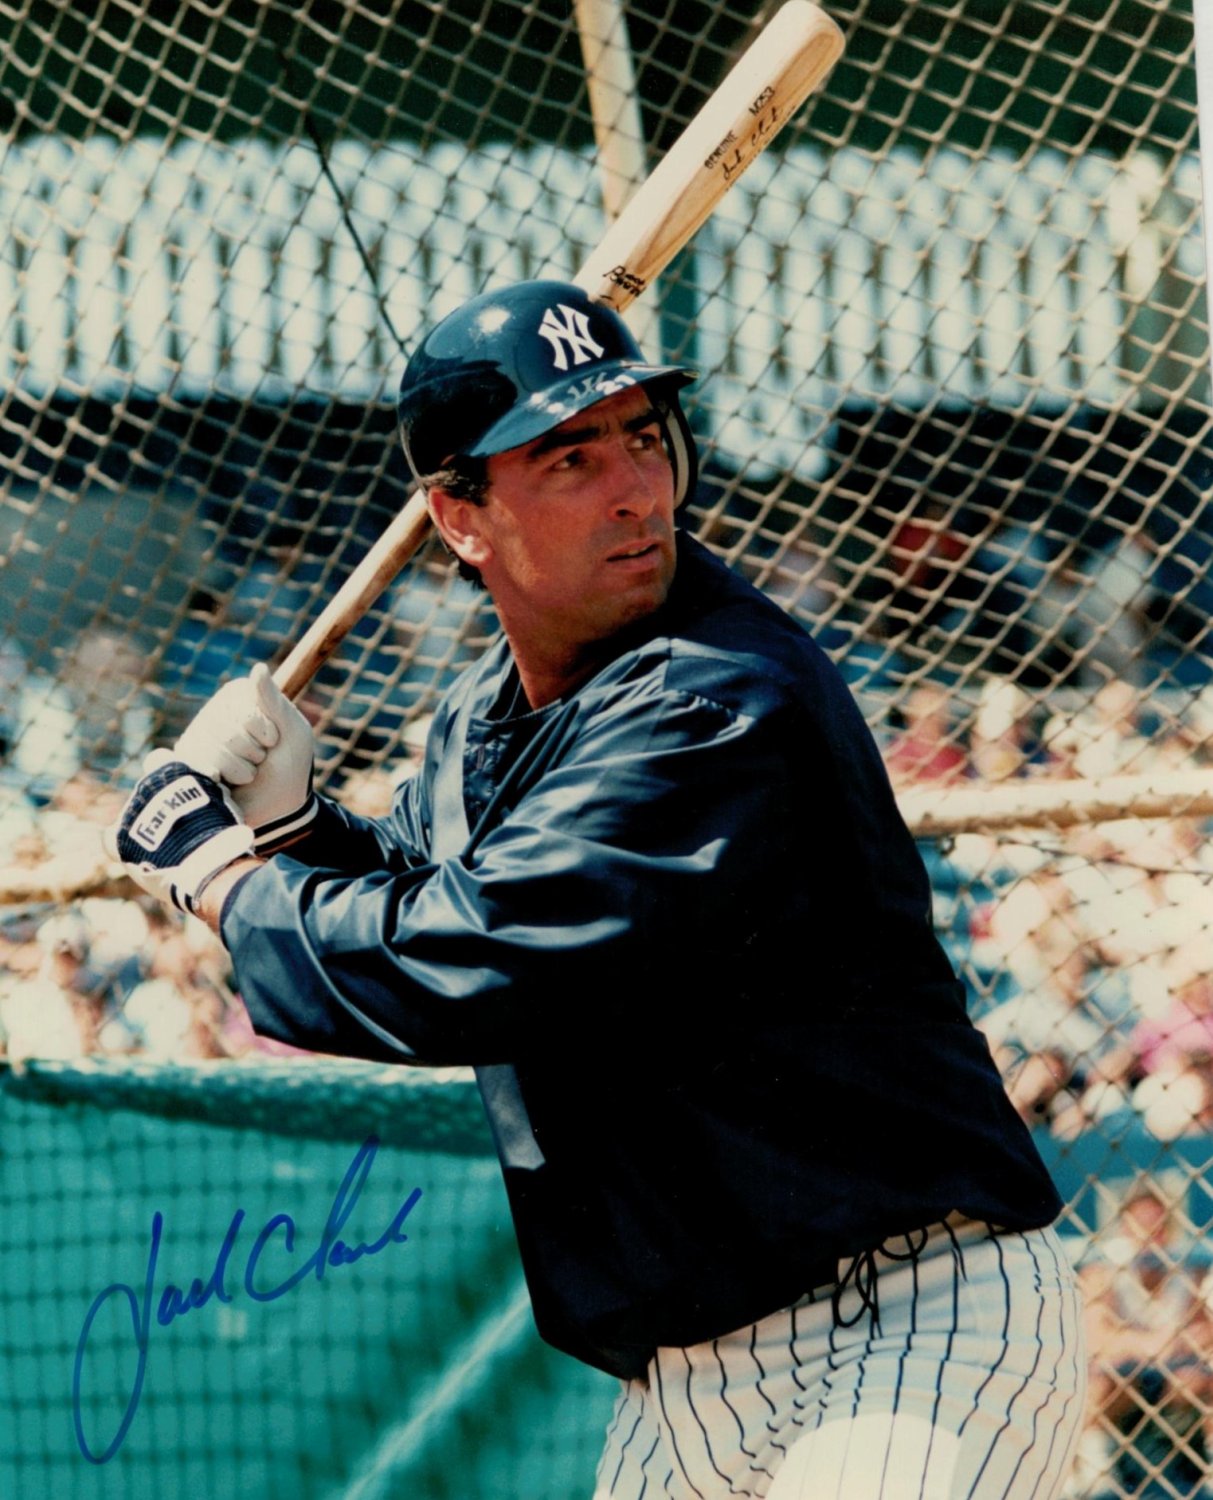 Jack Clark New York Yankees Autographed Signed 8x10 Photo - Certified  Authentic